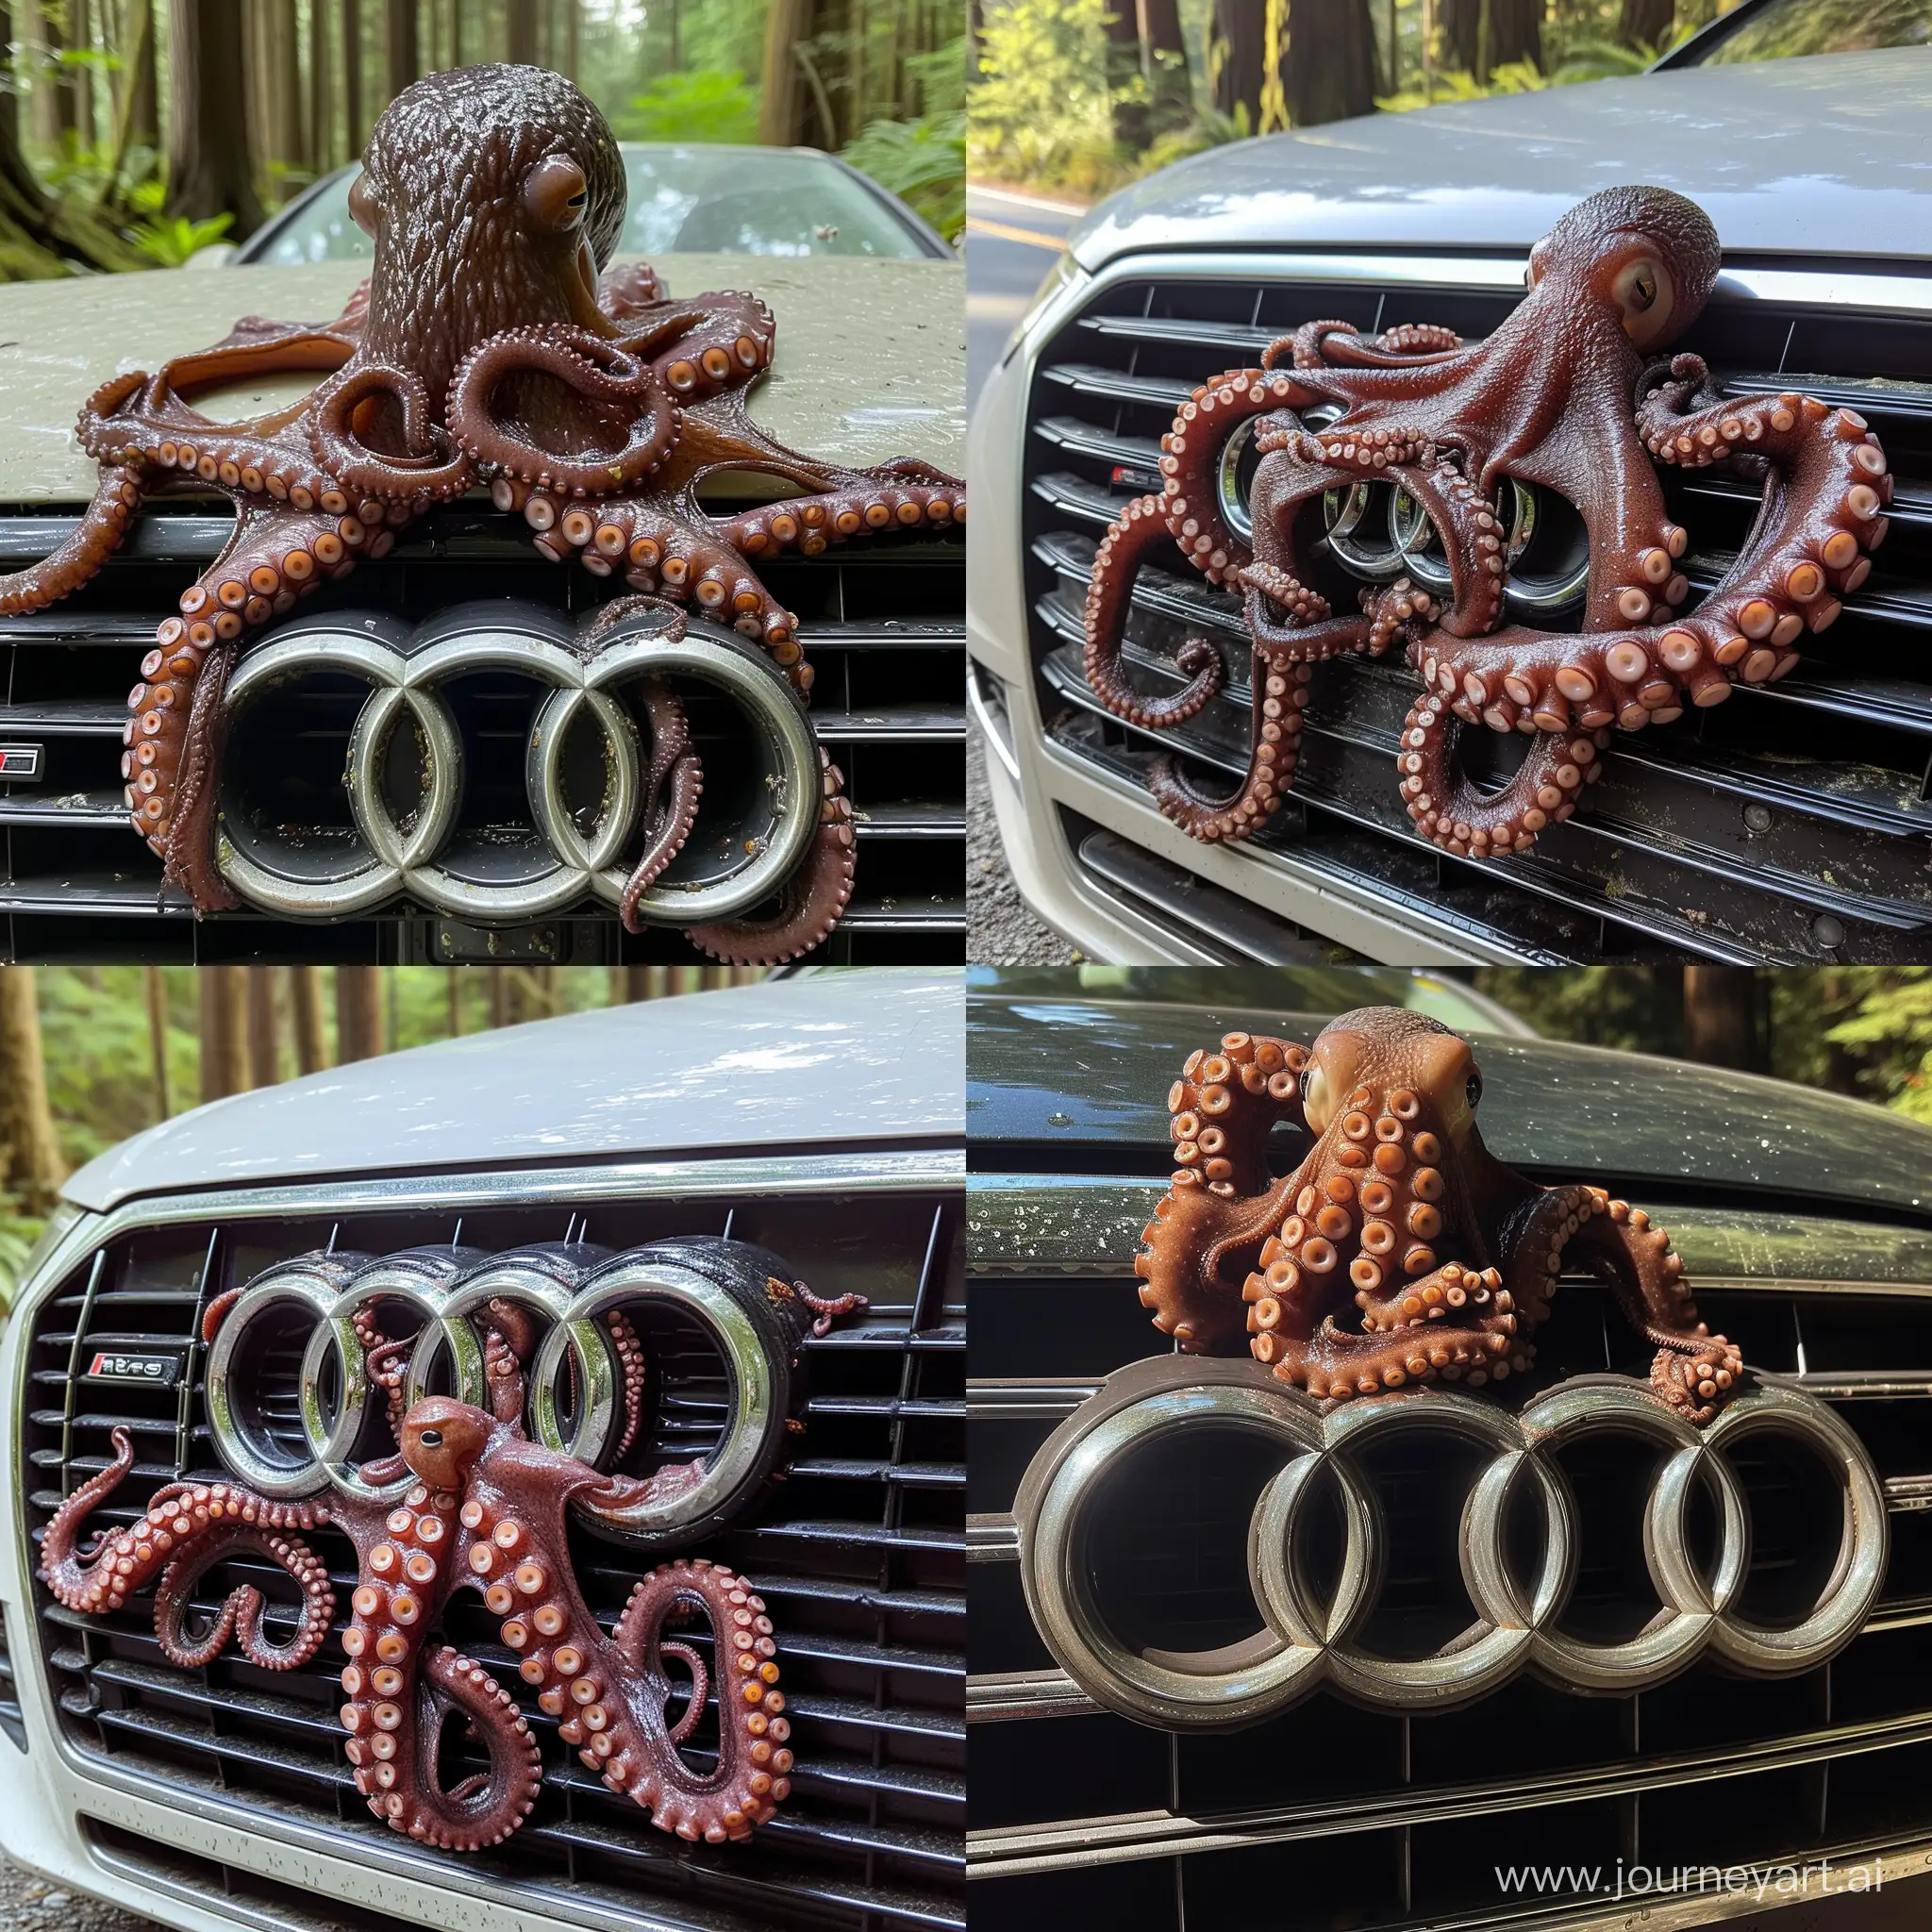 bright daylight cellphone photo of a slimy wet mottled brown octopus stuck in the front grill of a audi sedan, tentacles wrapped in between the grill, wide shot of the octopus with the whole front of the car in frame, route 101 state park road, coastal rainforest